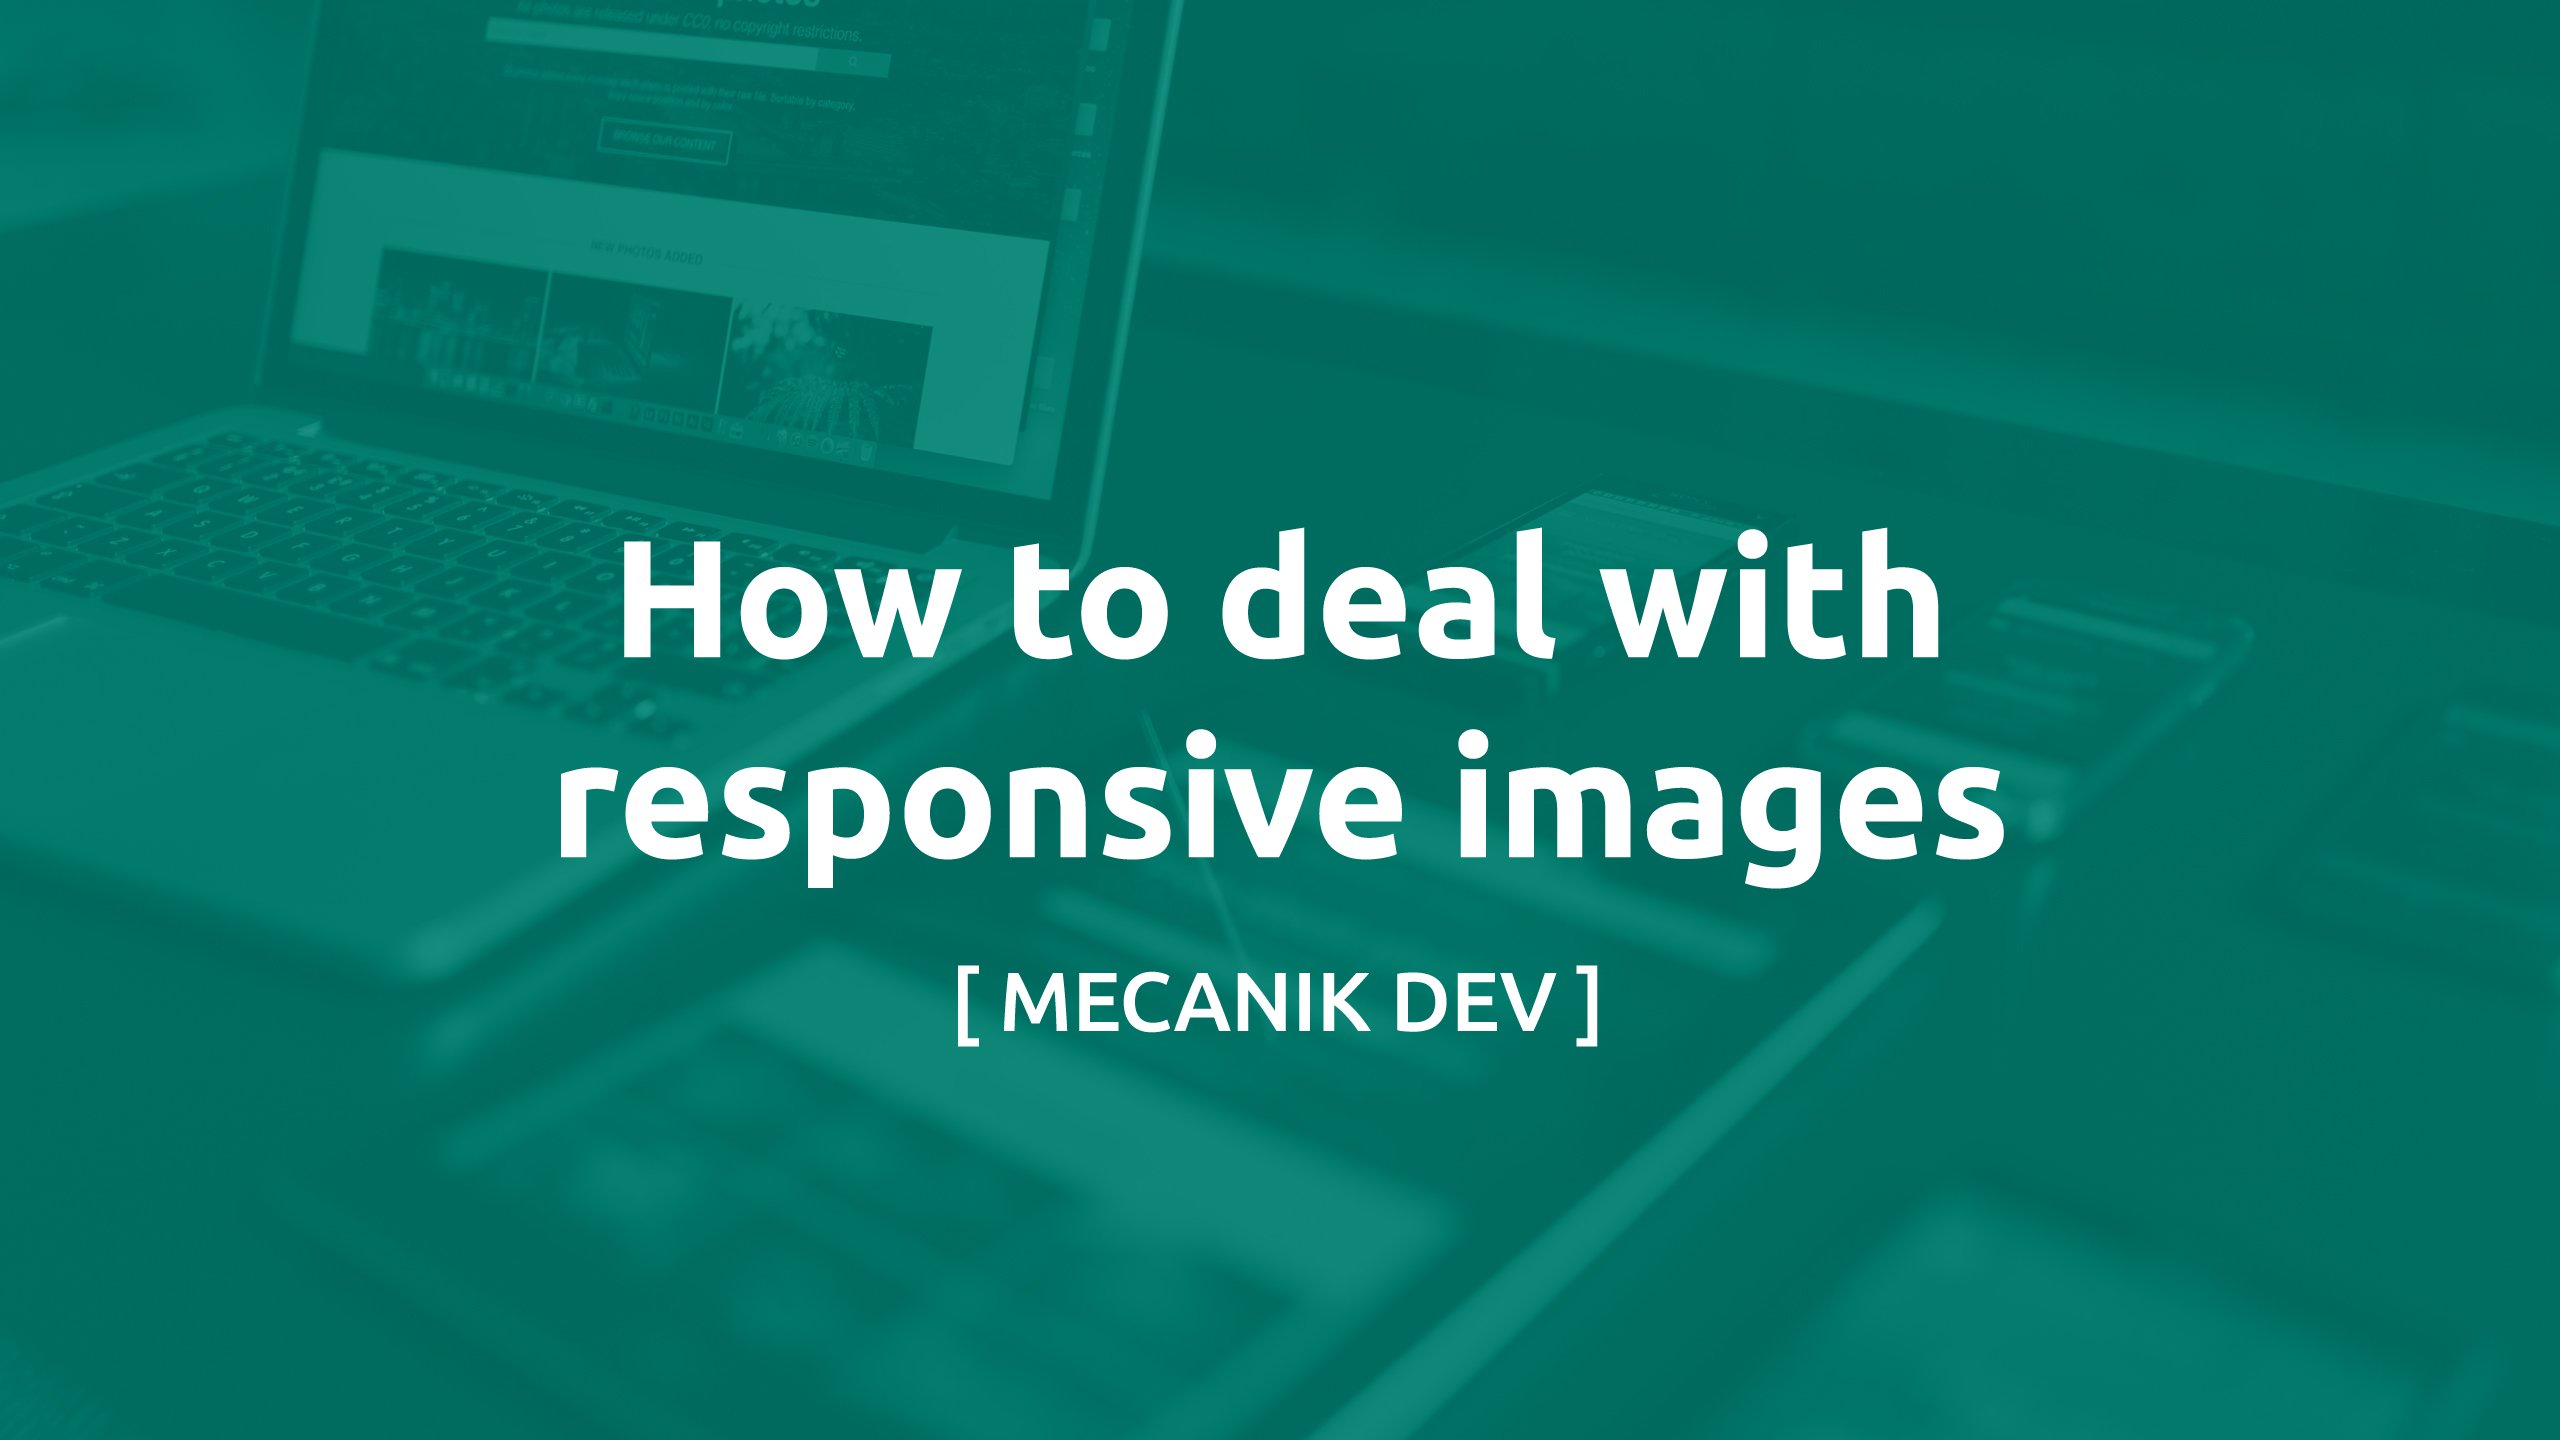 How To Deal With Responsive Images